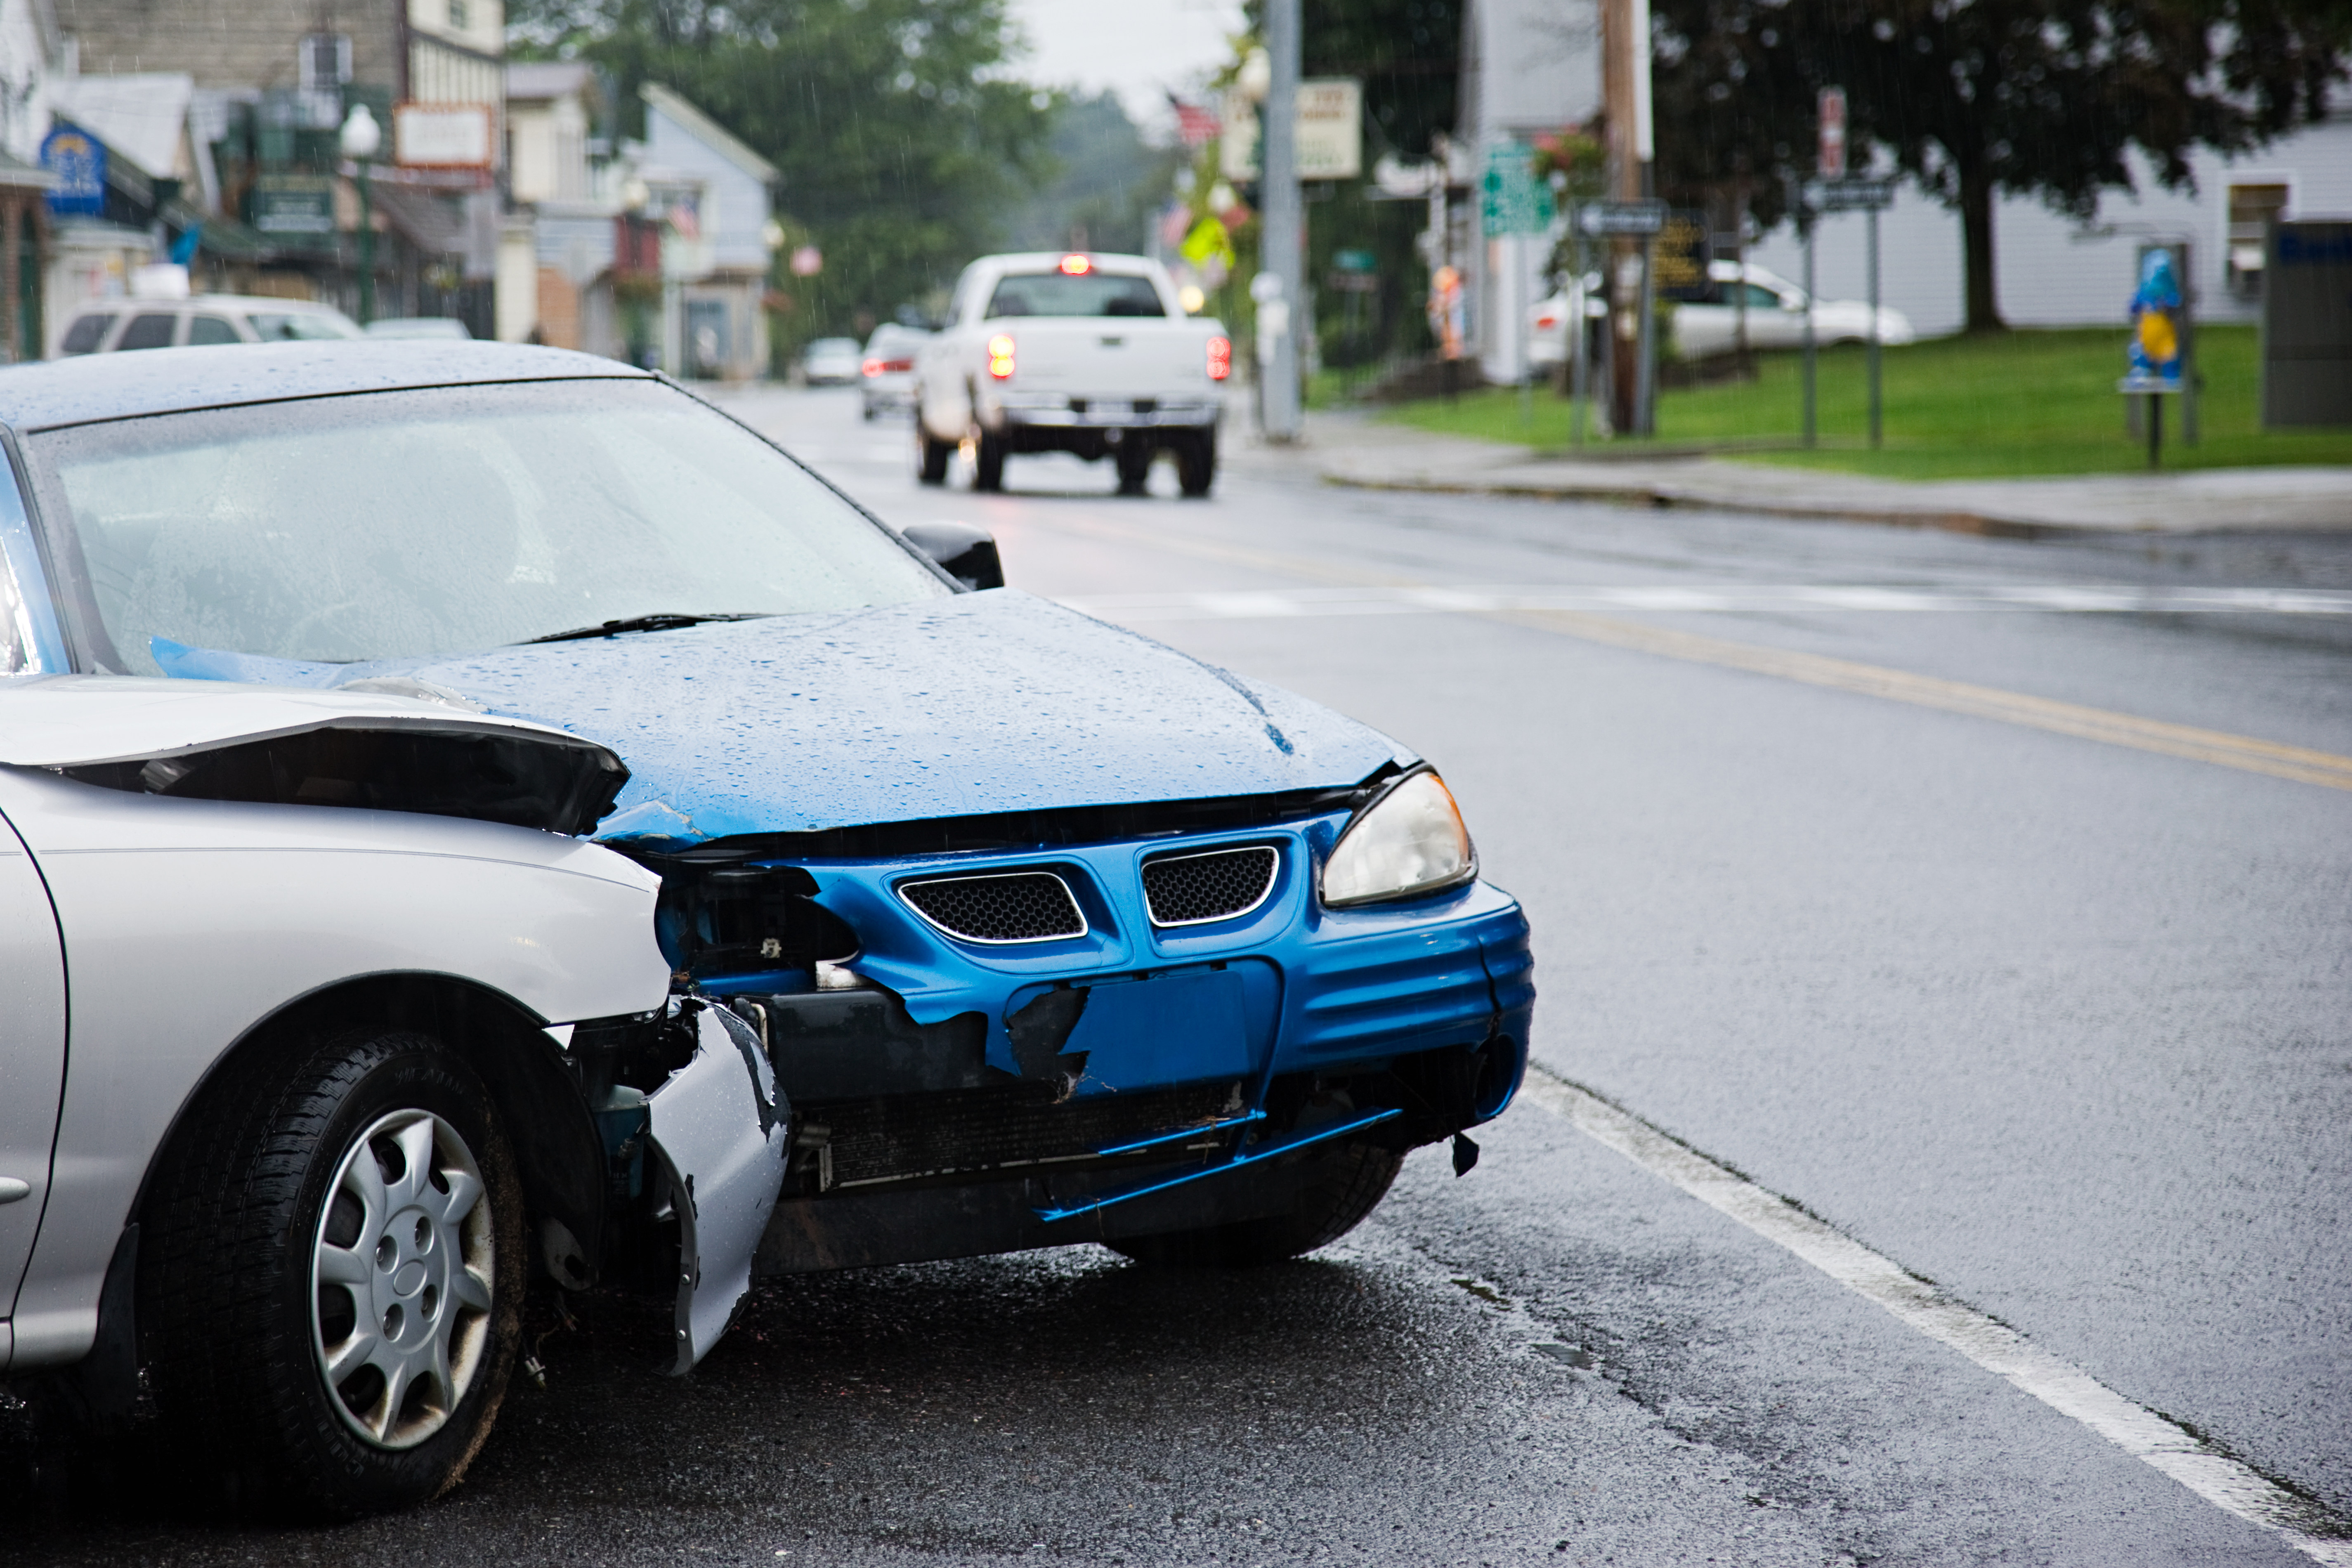 The Best and Worst States to Have a Fender Bender